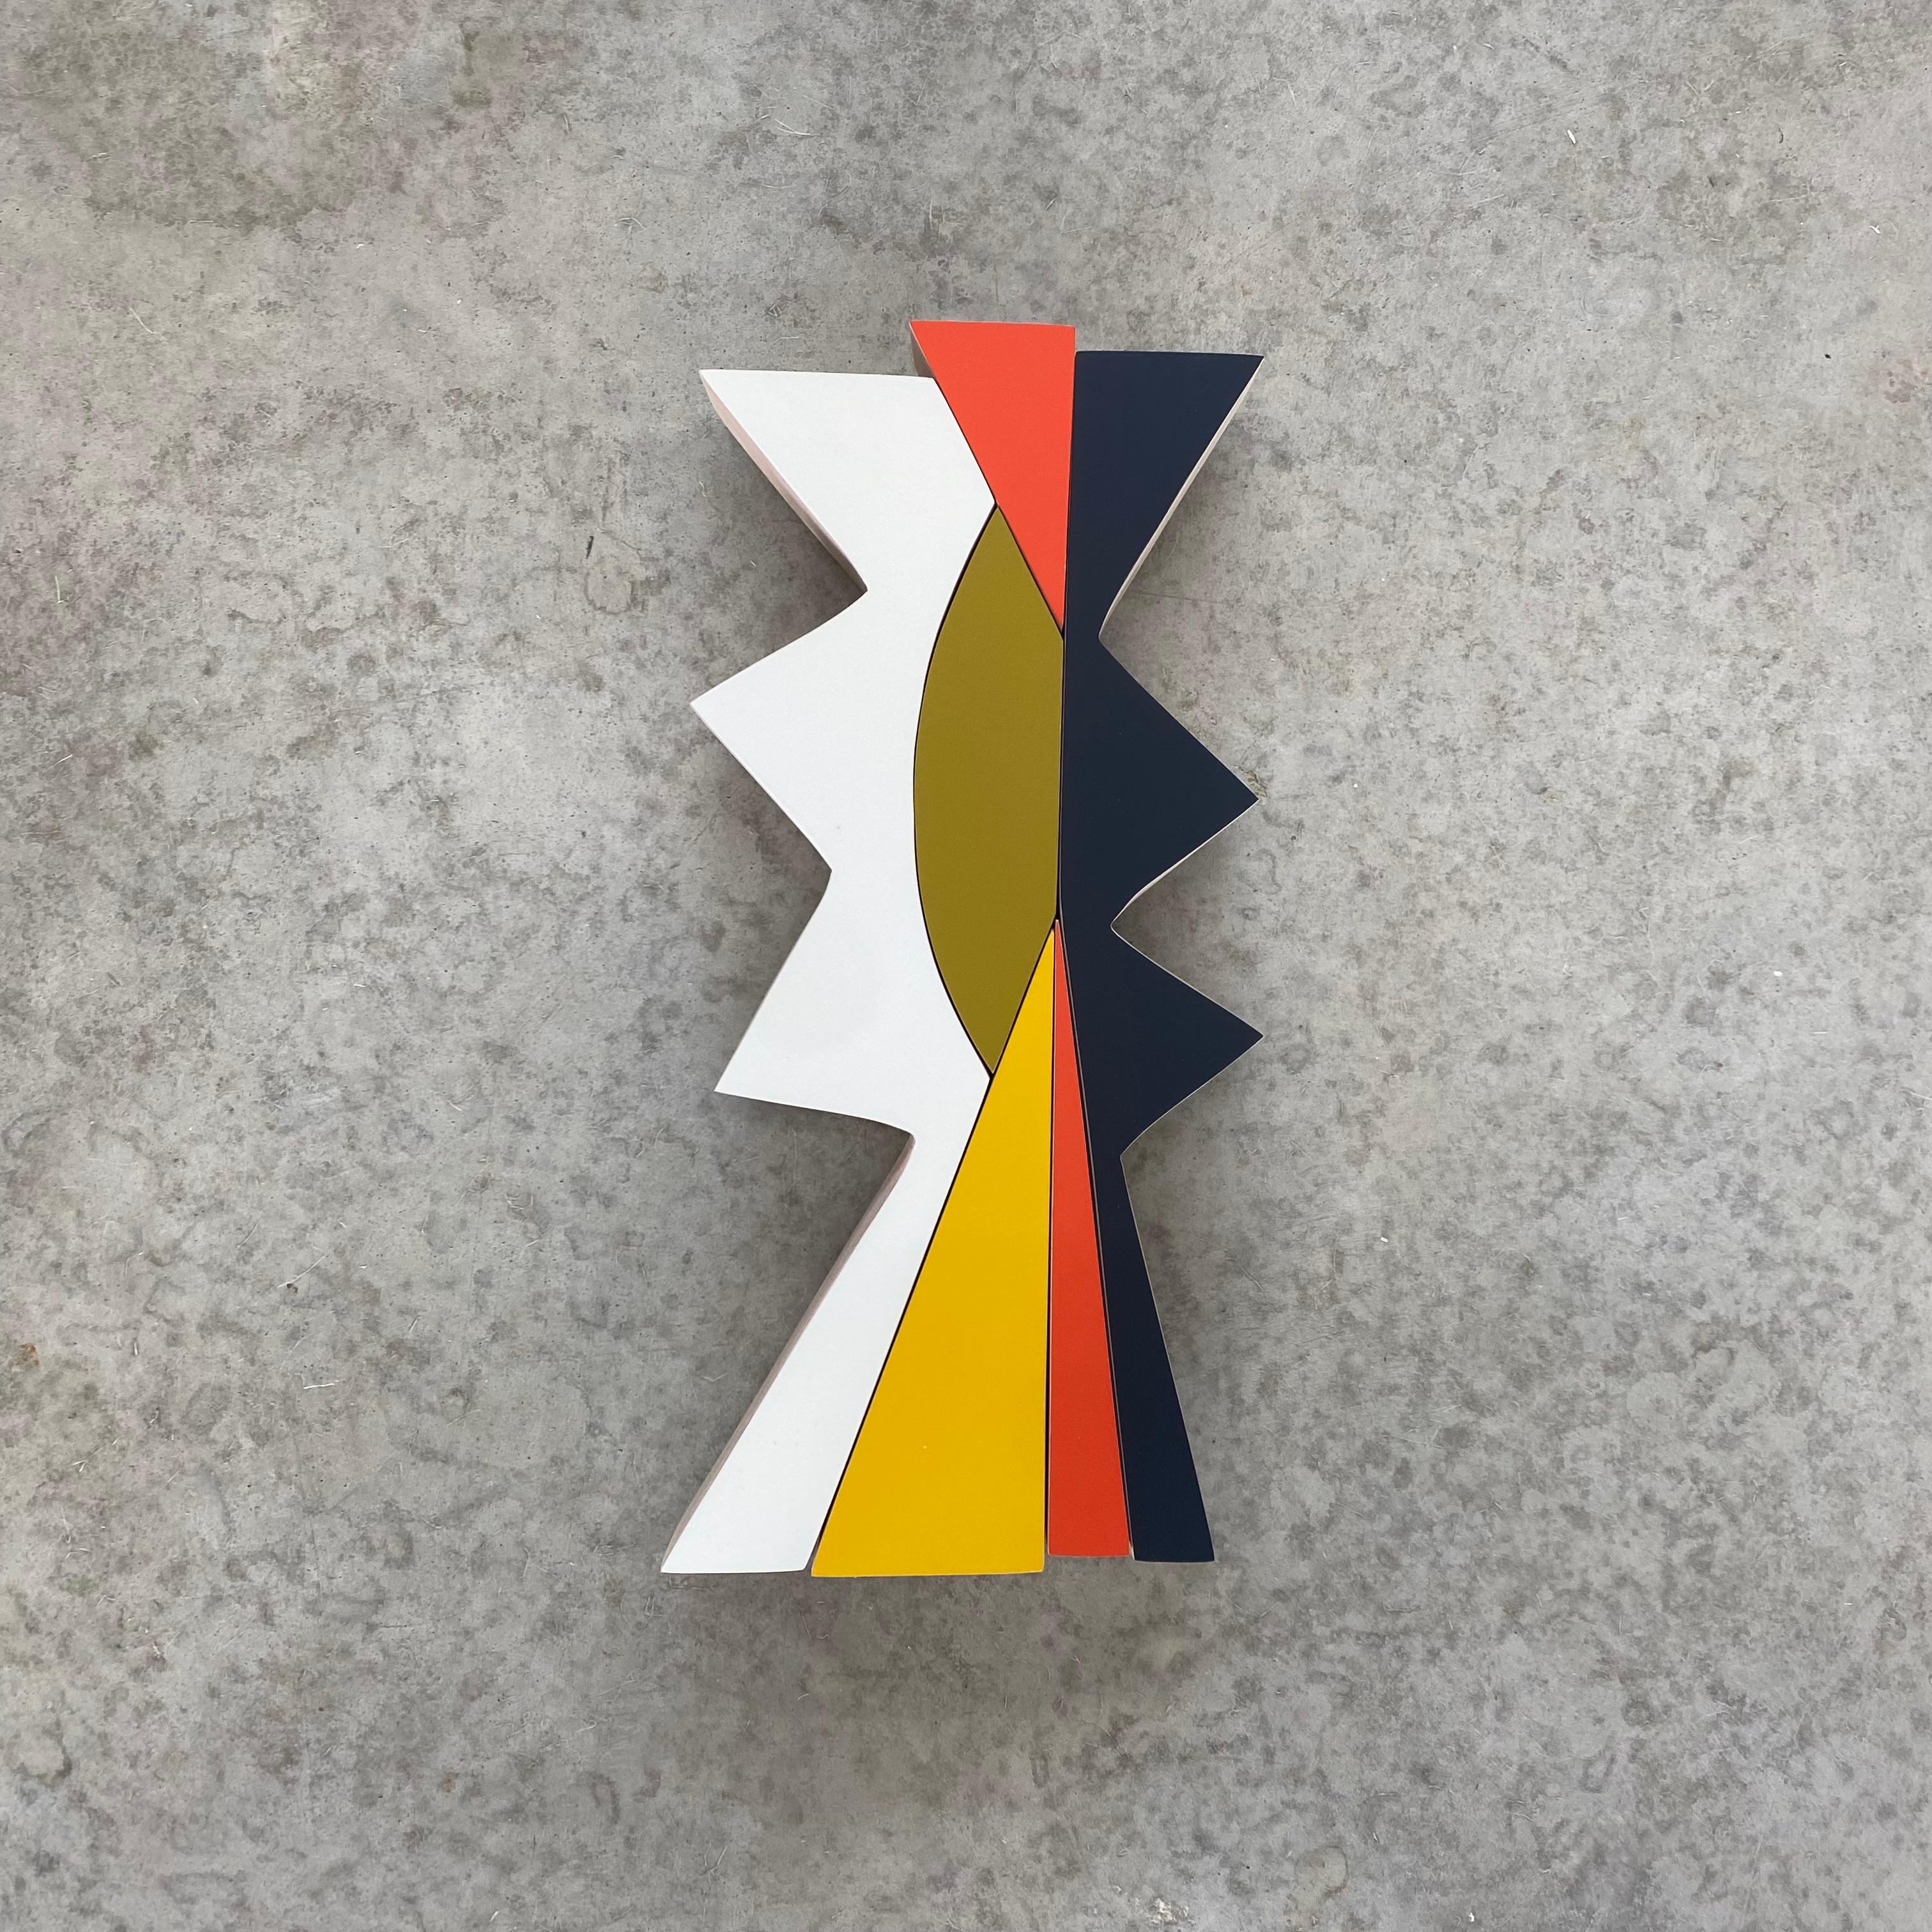 Acrylic on solid maple, matte clear coat

Small Pop series are minimalist driven, wood wall sculptures that are small and blocky and feature bright saturated colors. The pieces was inspired by my love for simple bold colors and modernist repeating